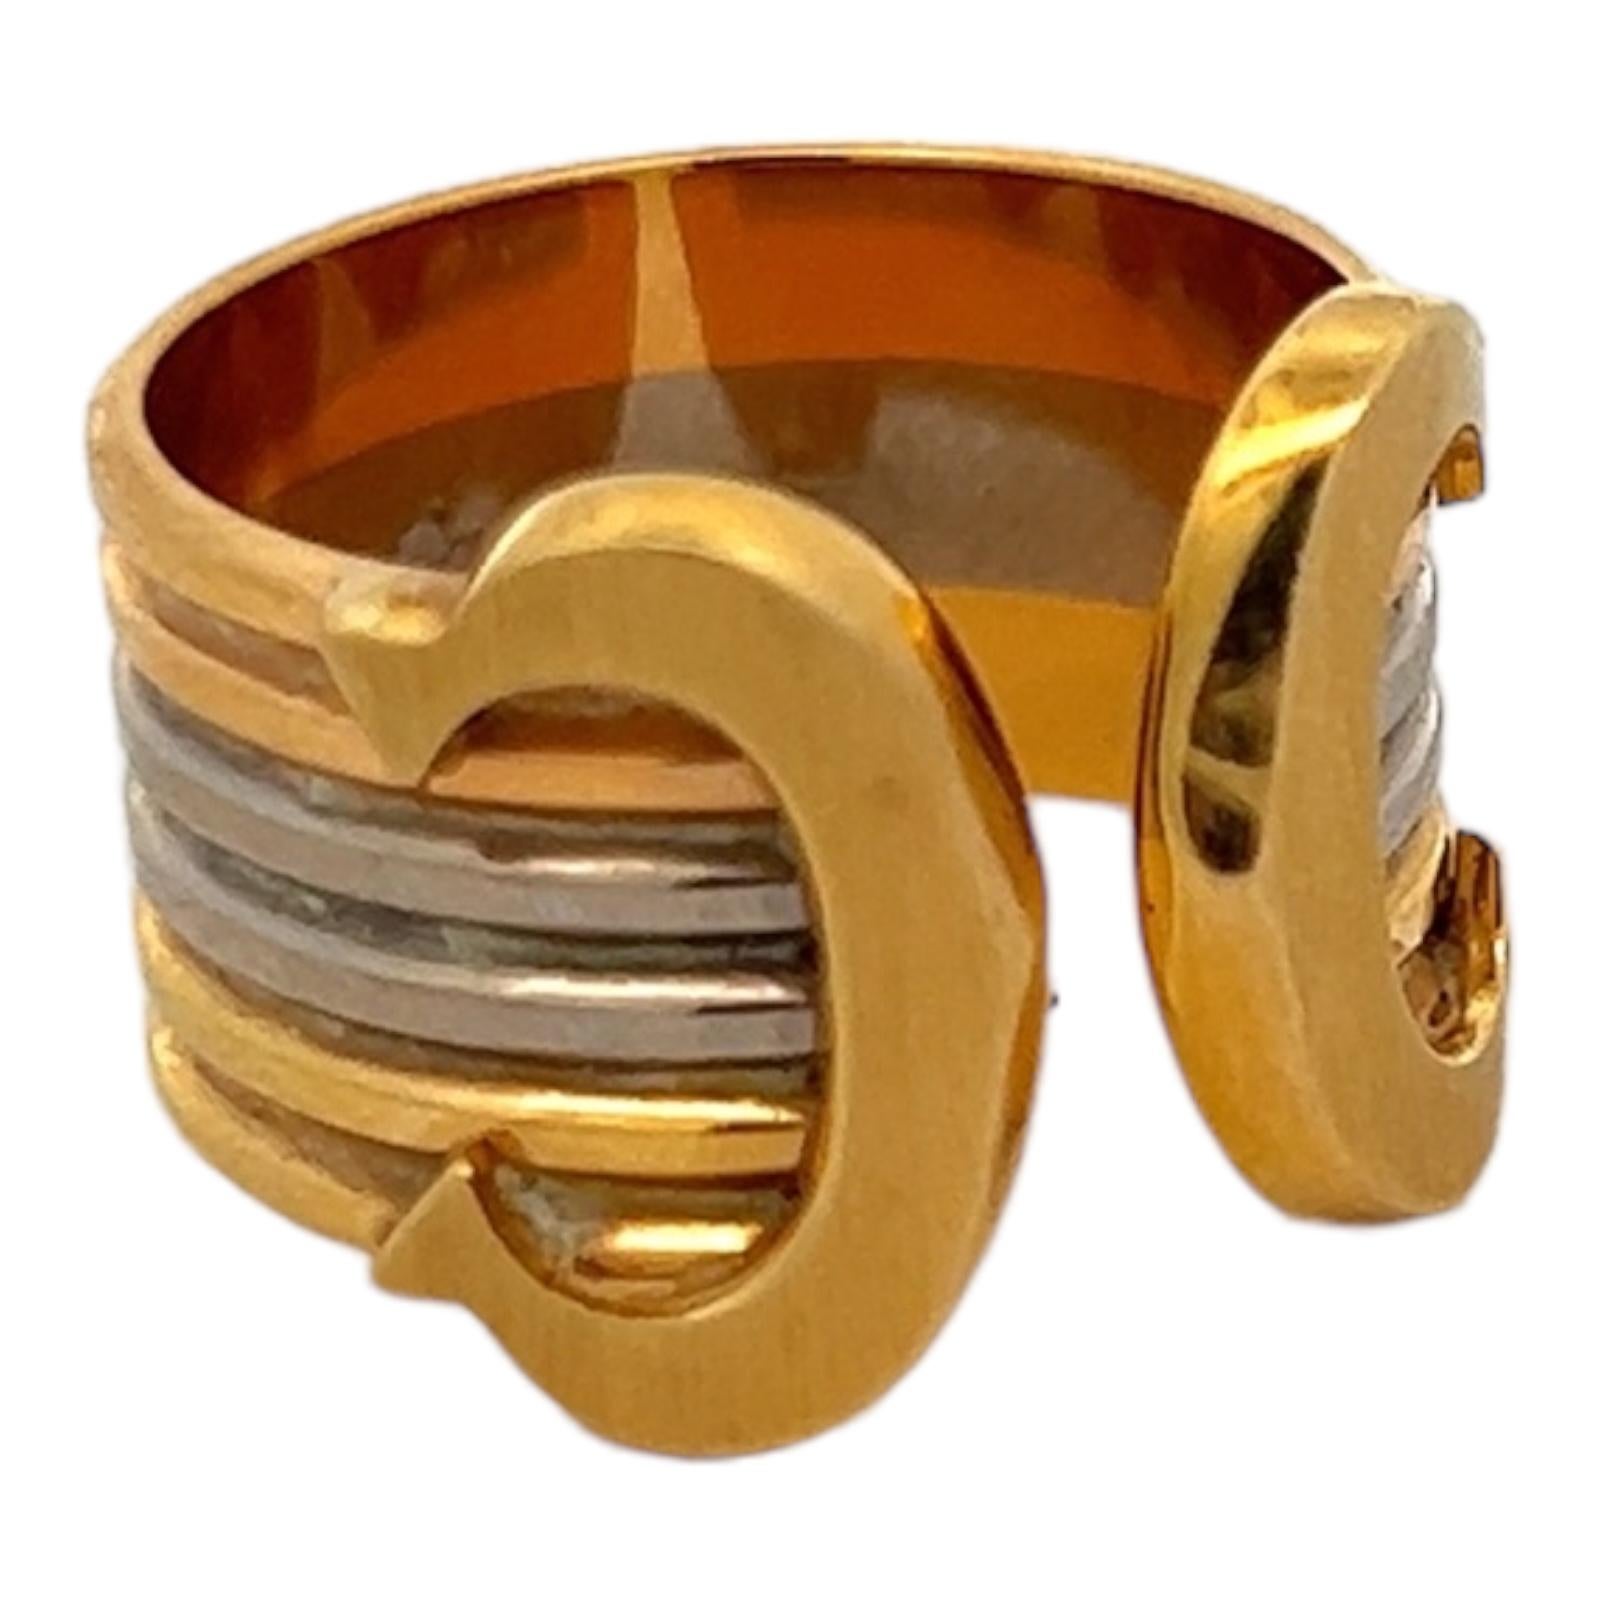 Cartier 18 Karat Tricolor Gold Trinity Double 'C' Pinky Band Ring Size In Excellent Condition For Sale In Boca Raton, FL